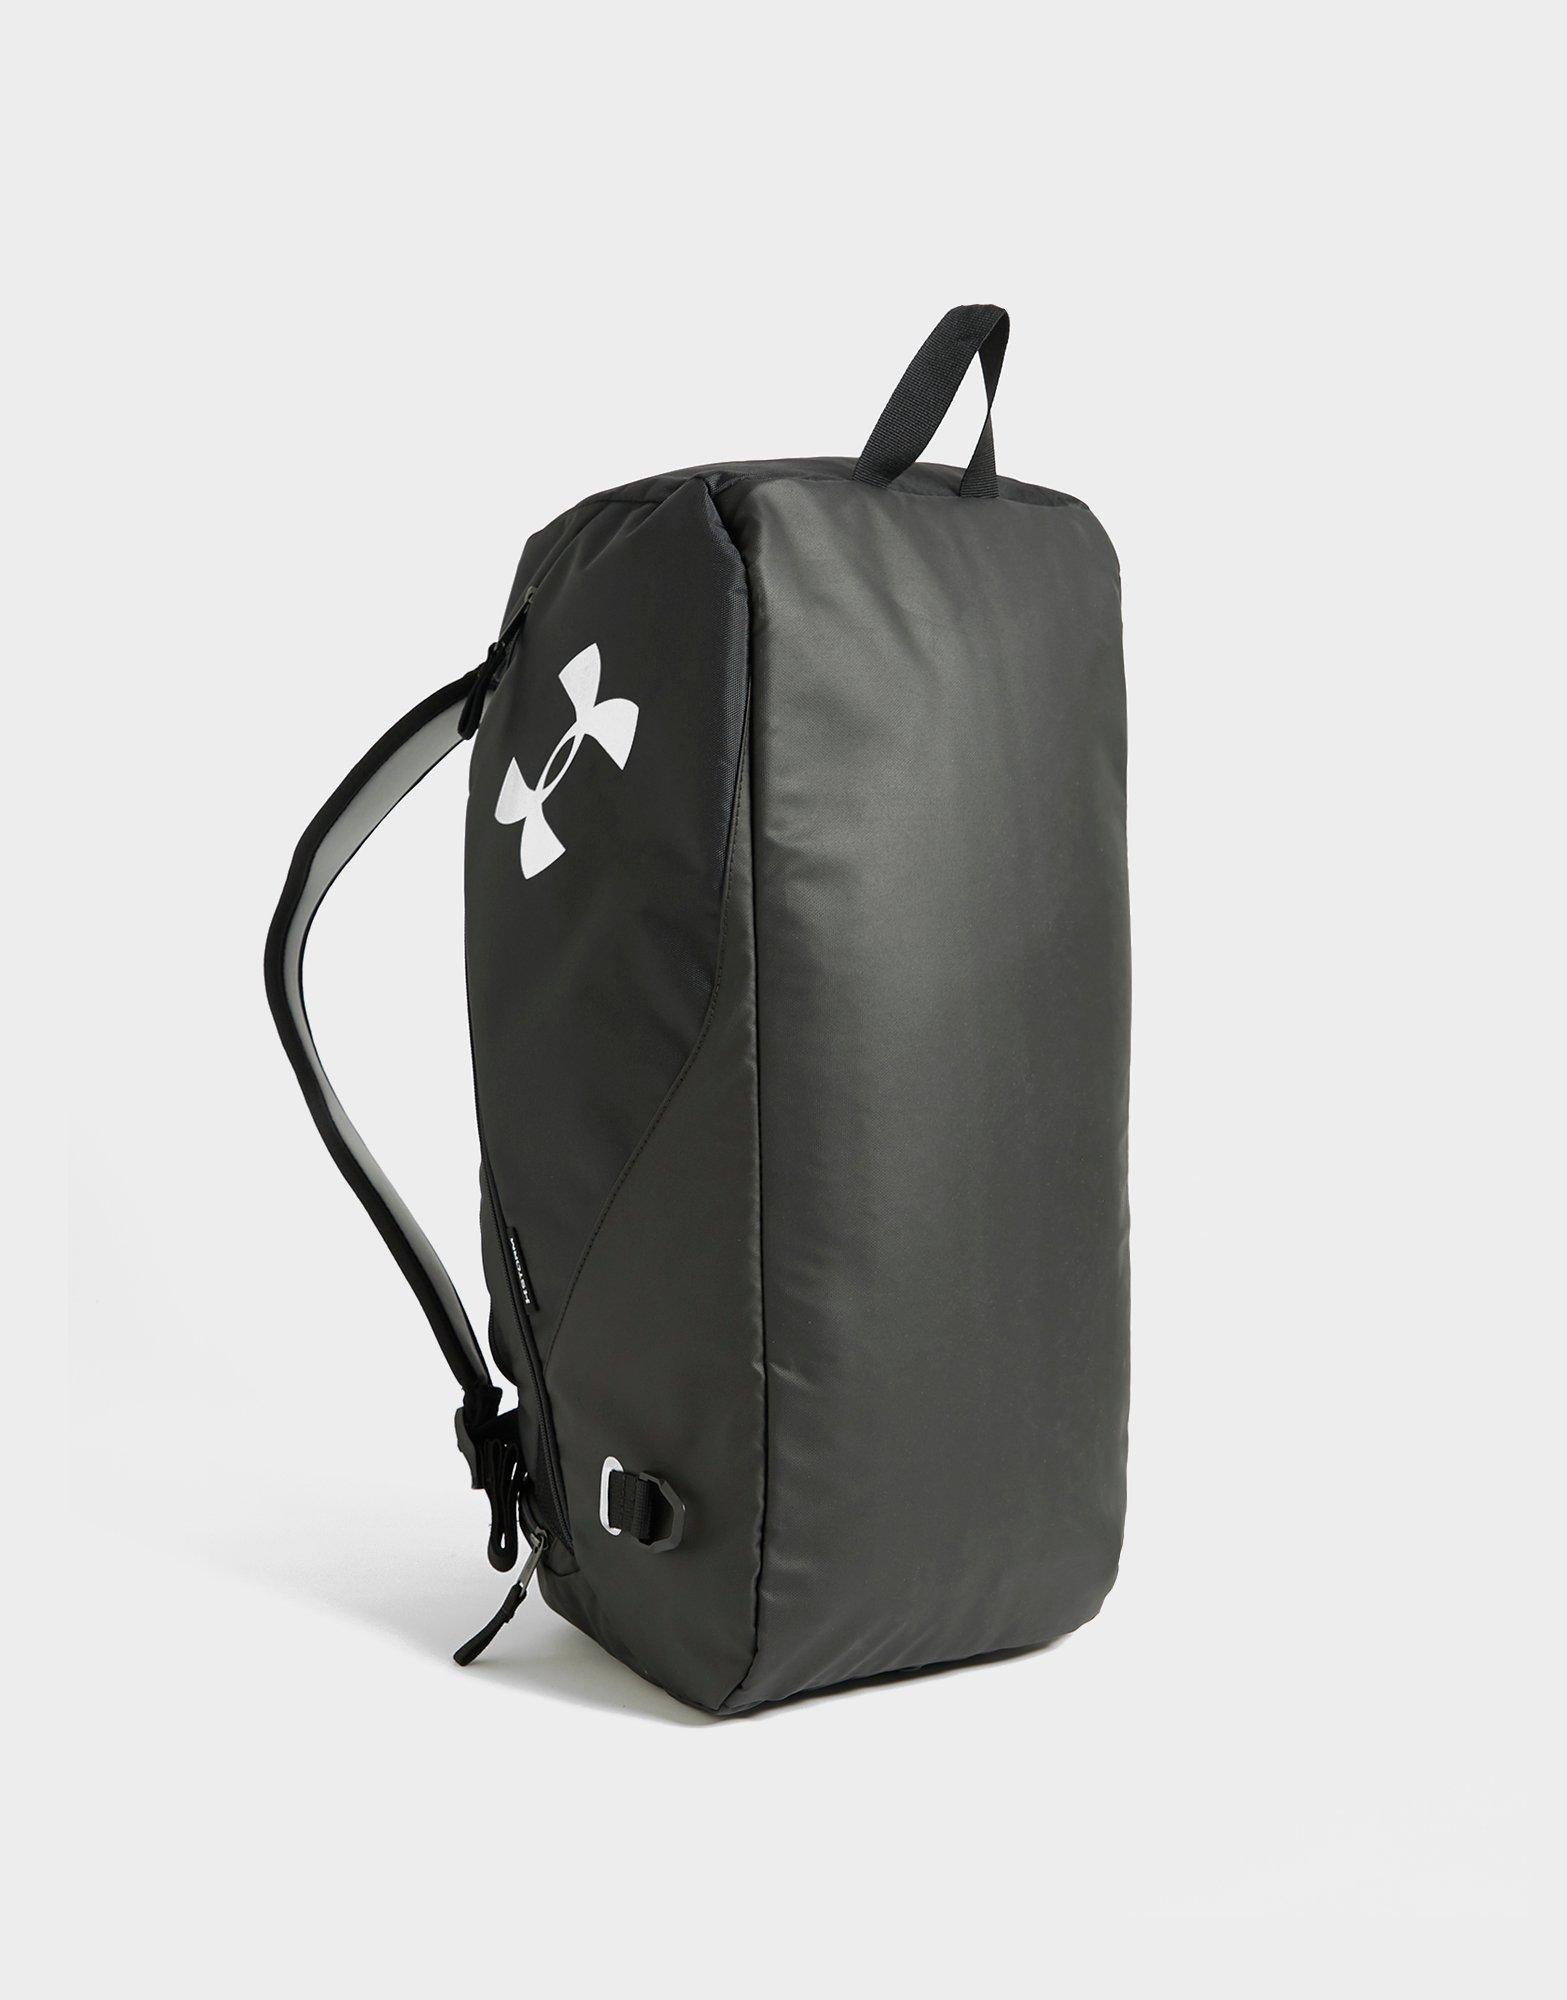 under armor duffle backpack